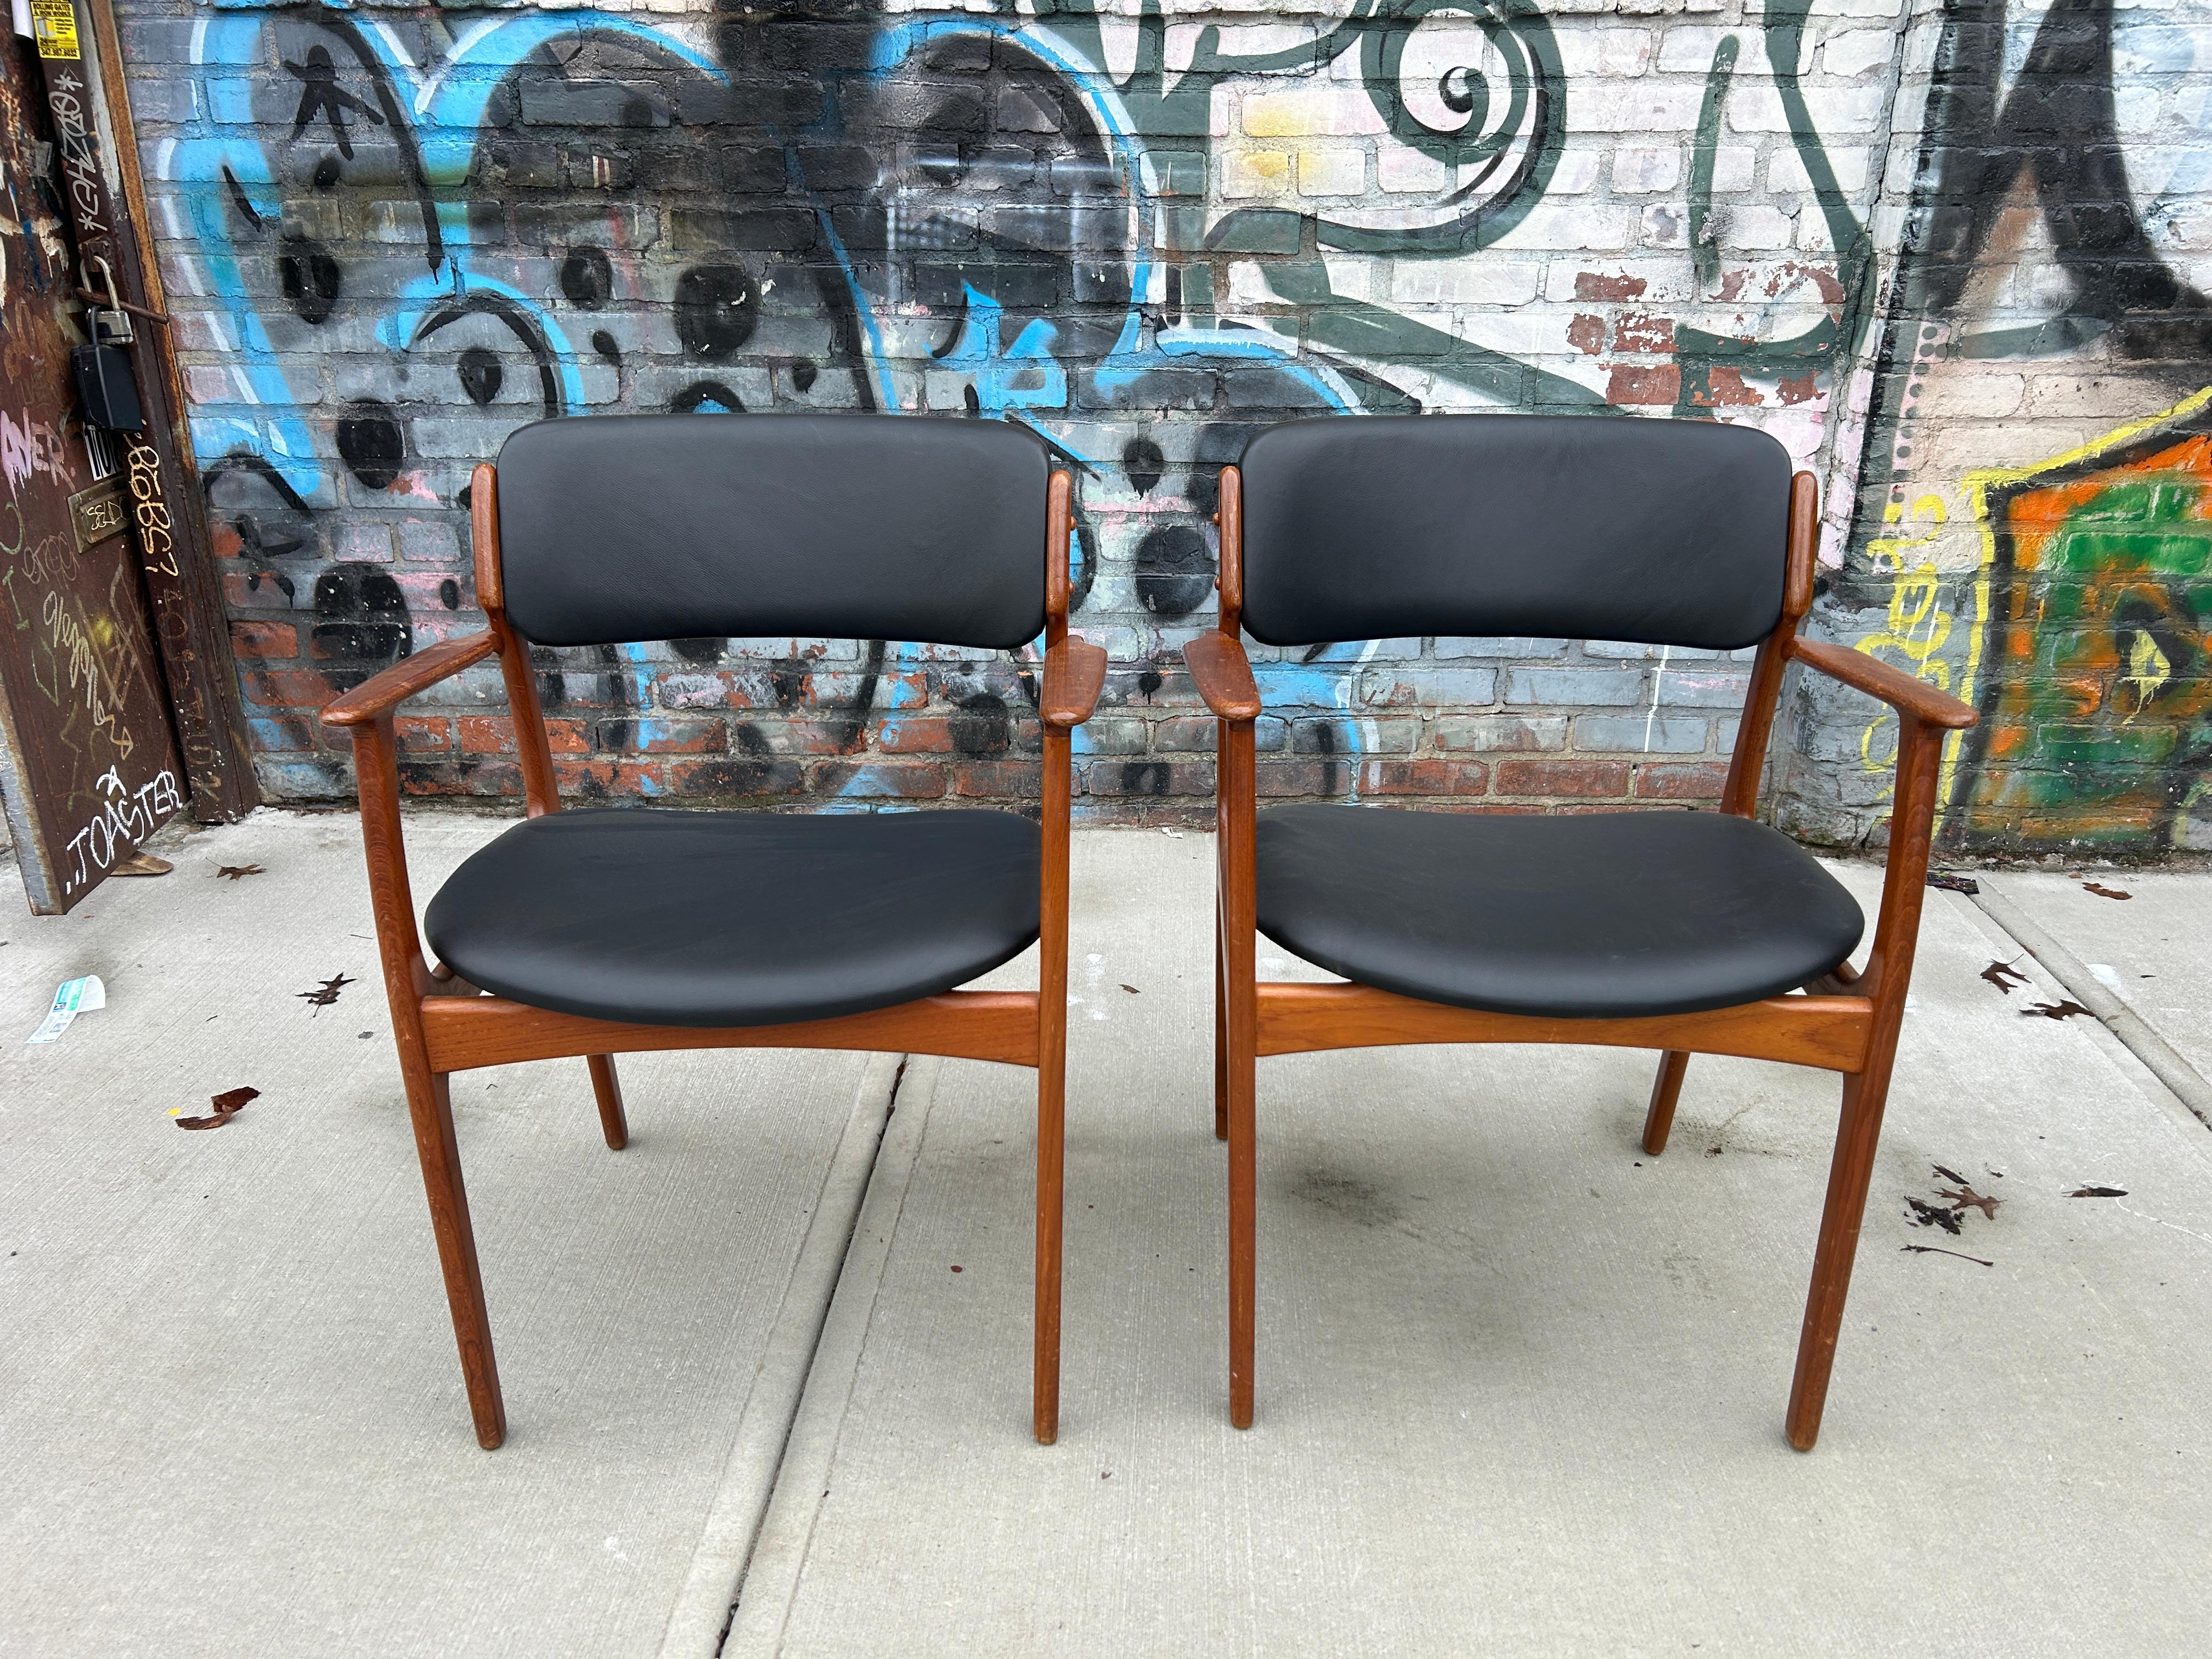 Pair of mid century danish modern Erik Buch Teak model 49 dining arm chairs. Beautiful black leather upholstery. Sold as a pair (2) chairs. Made in Denmark. Located in Brooklyn NYC.

Dimensions: H 32